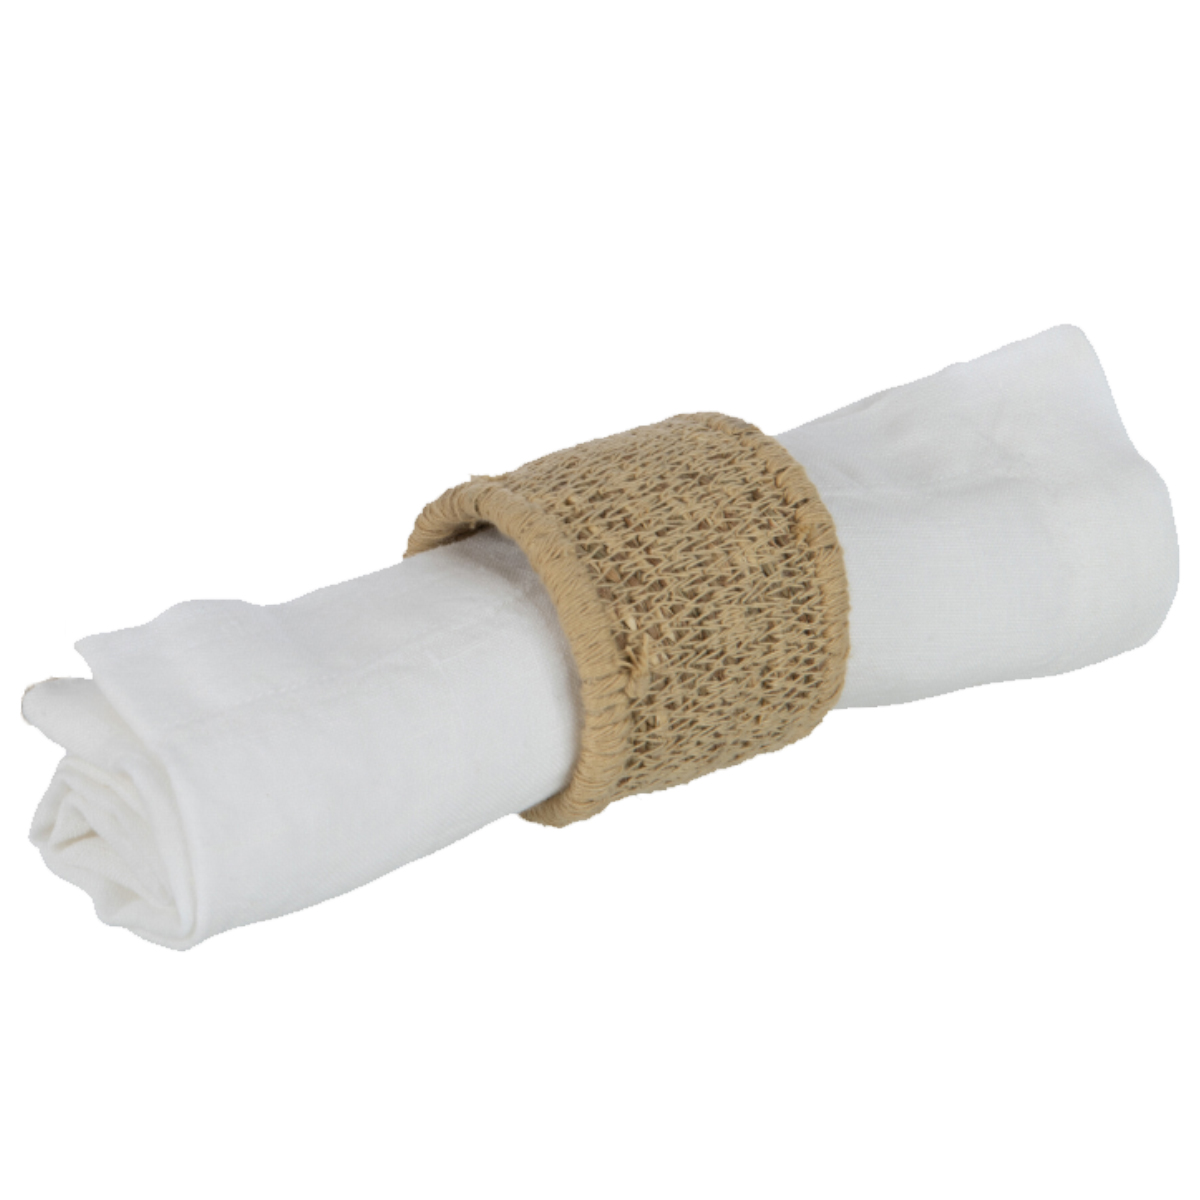 Set of 4 seagrass napkin rings